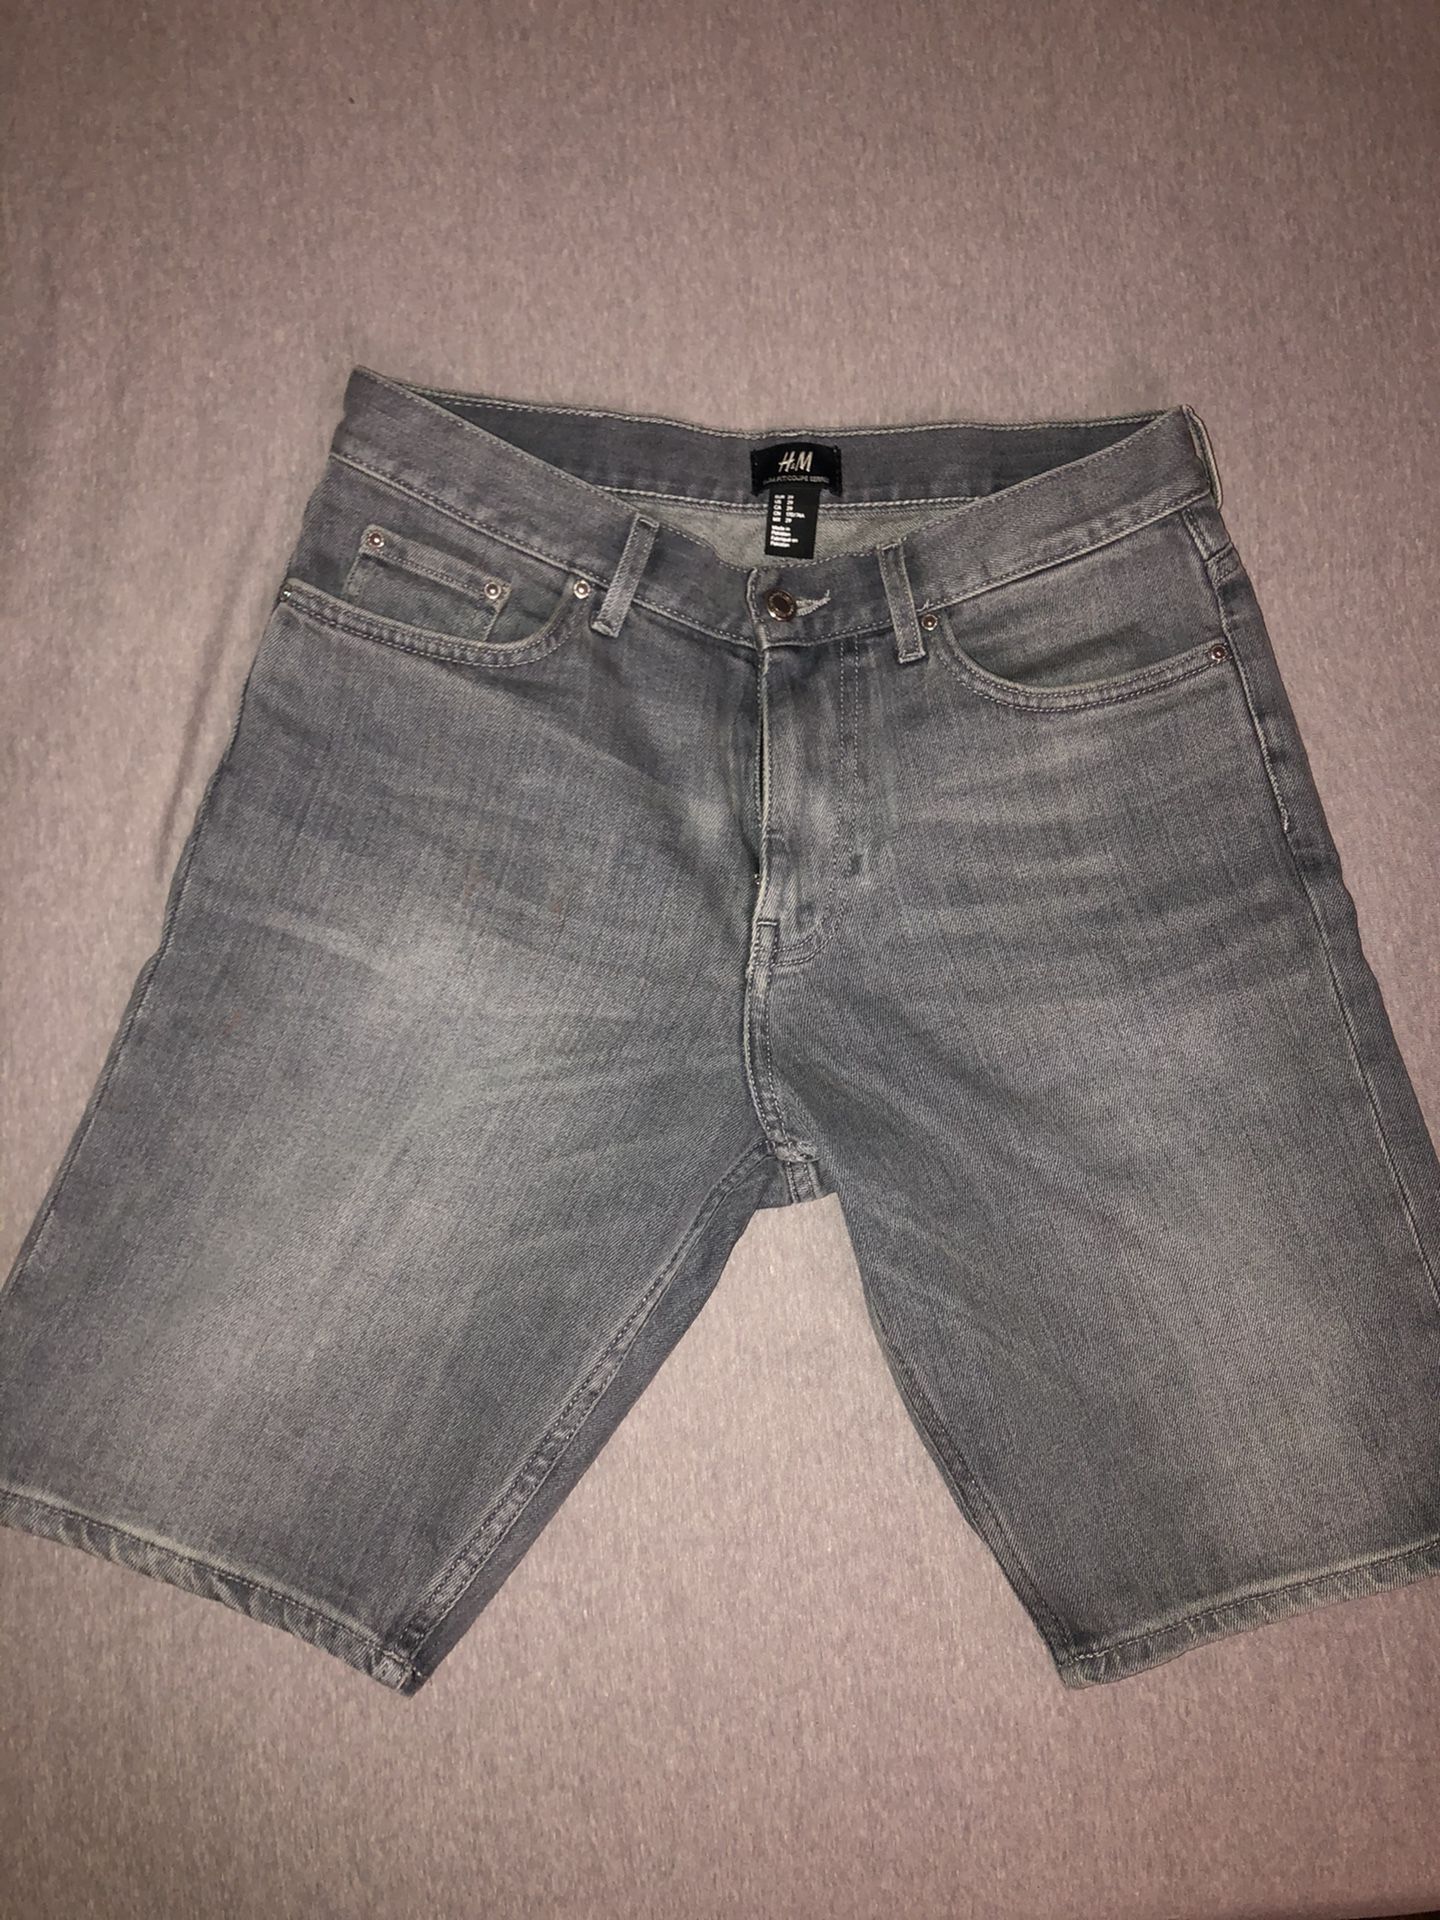 New H&M Shorts Size 29